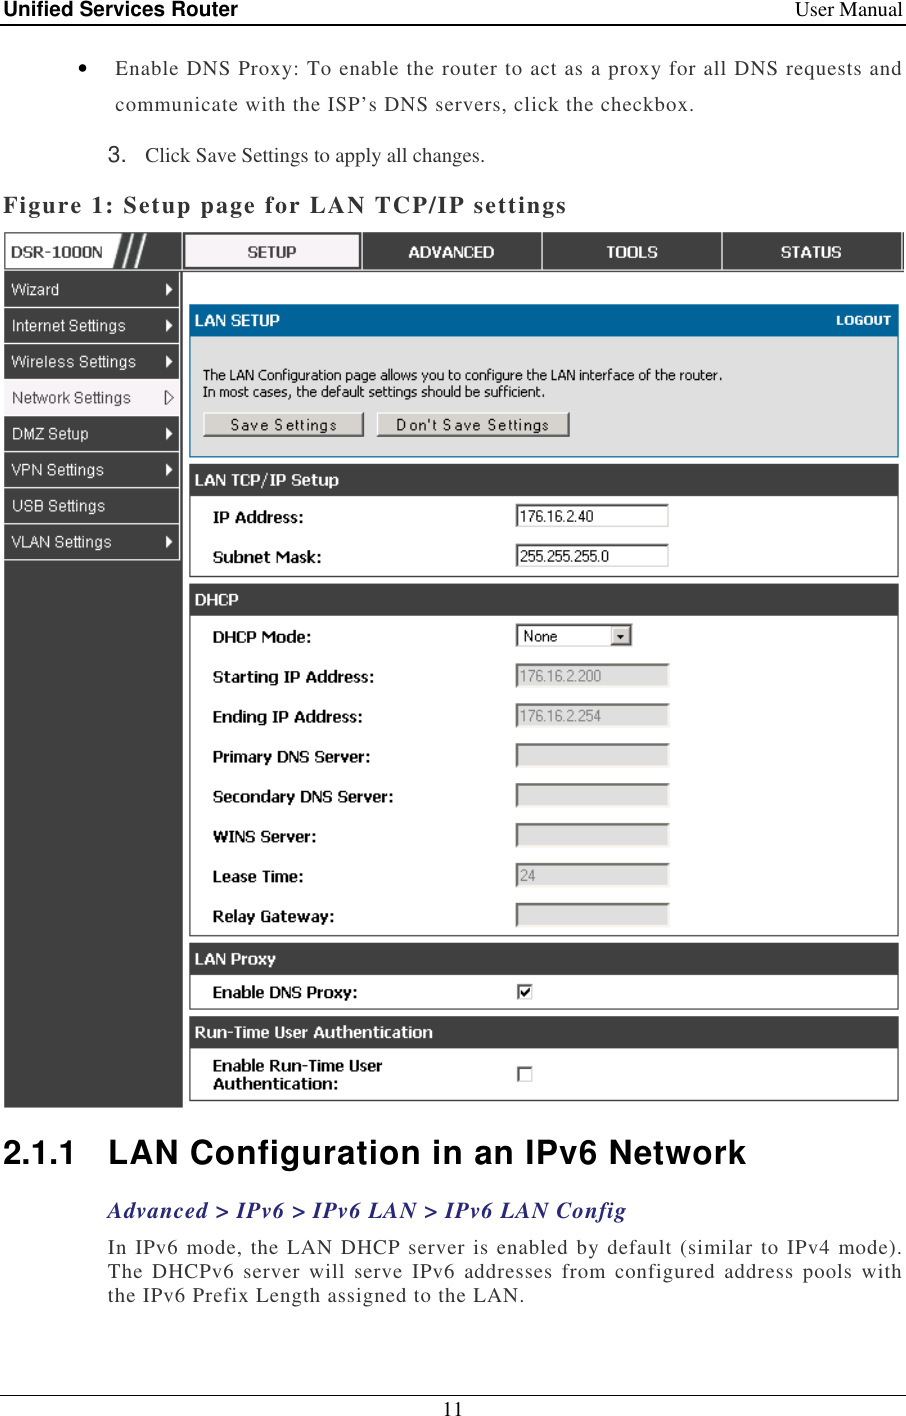 Unified Services Router    User Manual 11  • Enable DNS Proxy: To enable the router to act as a proxy for all DNS requests and communicate with the ISP’s DNS servers, click the checkbox. 3.  Click Save Settings to apply all changes. Figure 1: Setup page for LAN TCP/IP settings  2.1.1  LAN Configuration in an IPv6 Network Advanced &gt; IPv6 &gt; IPv6 LAN &gt; IPv6 LAN Config In IPv6 mode, the LAN DHCP server is enabled by default (similar to IPv4 mode). The  DHCPv6  server  will  serve  IPv6  addresses  from  configured  address  pools  with the IPv6 Prefix Length assigned to the LAN.  